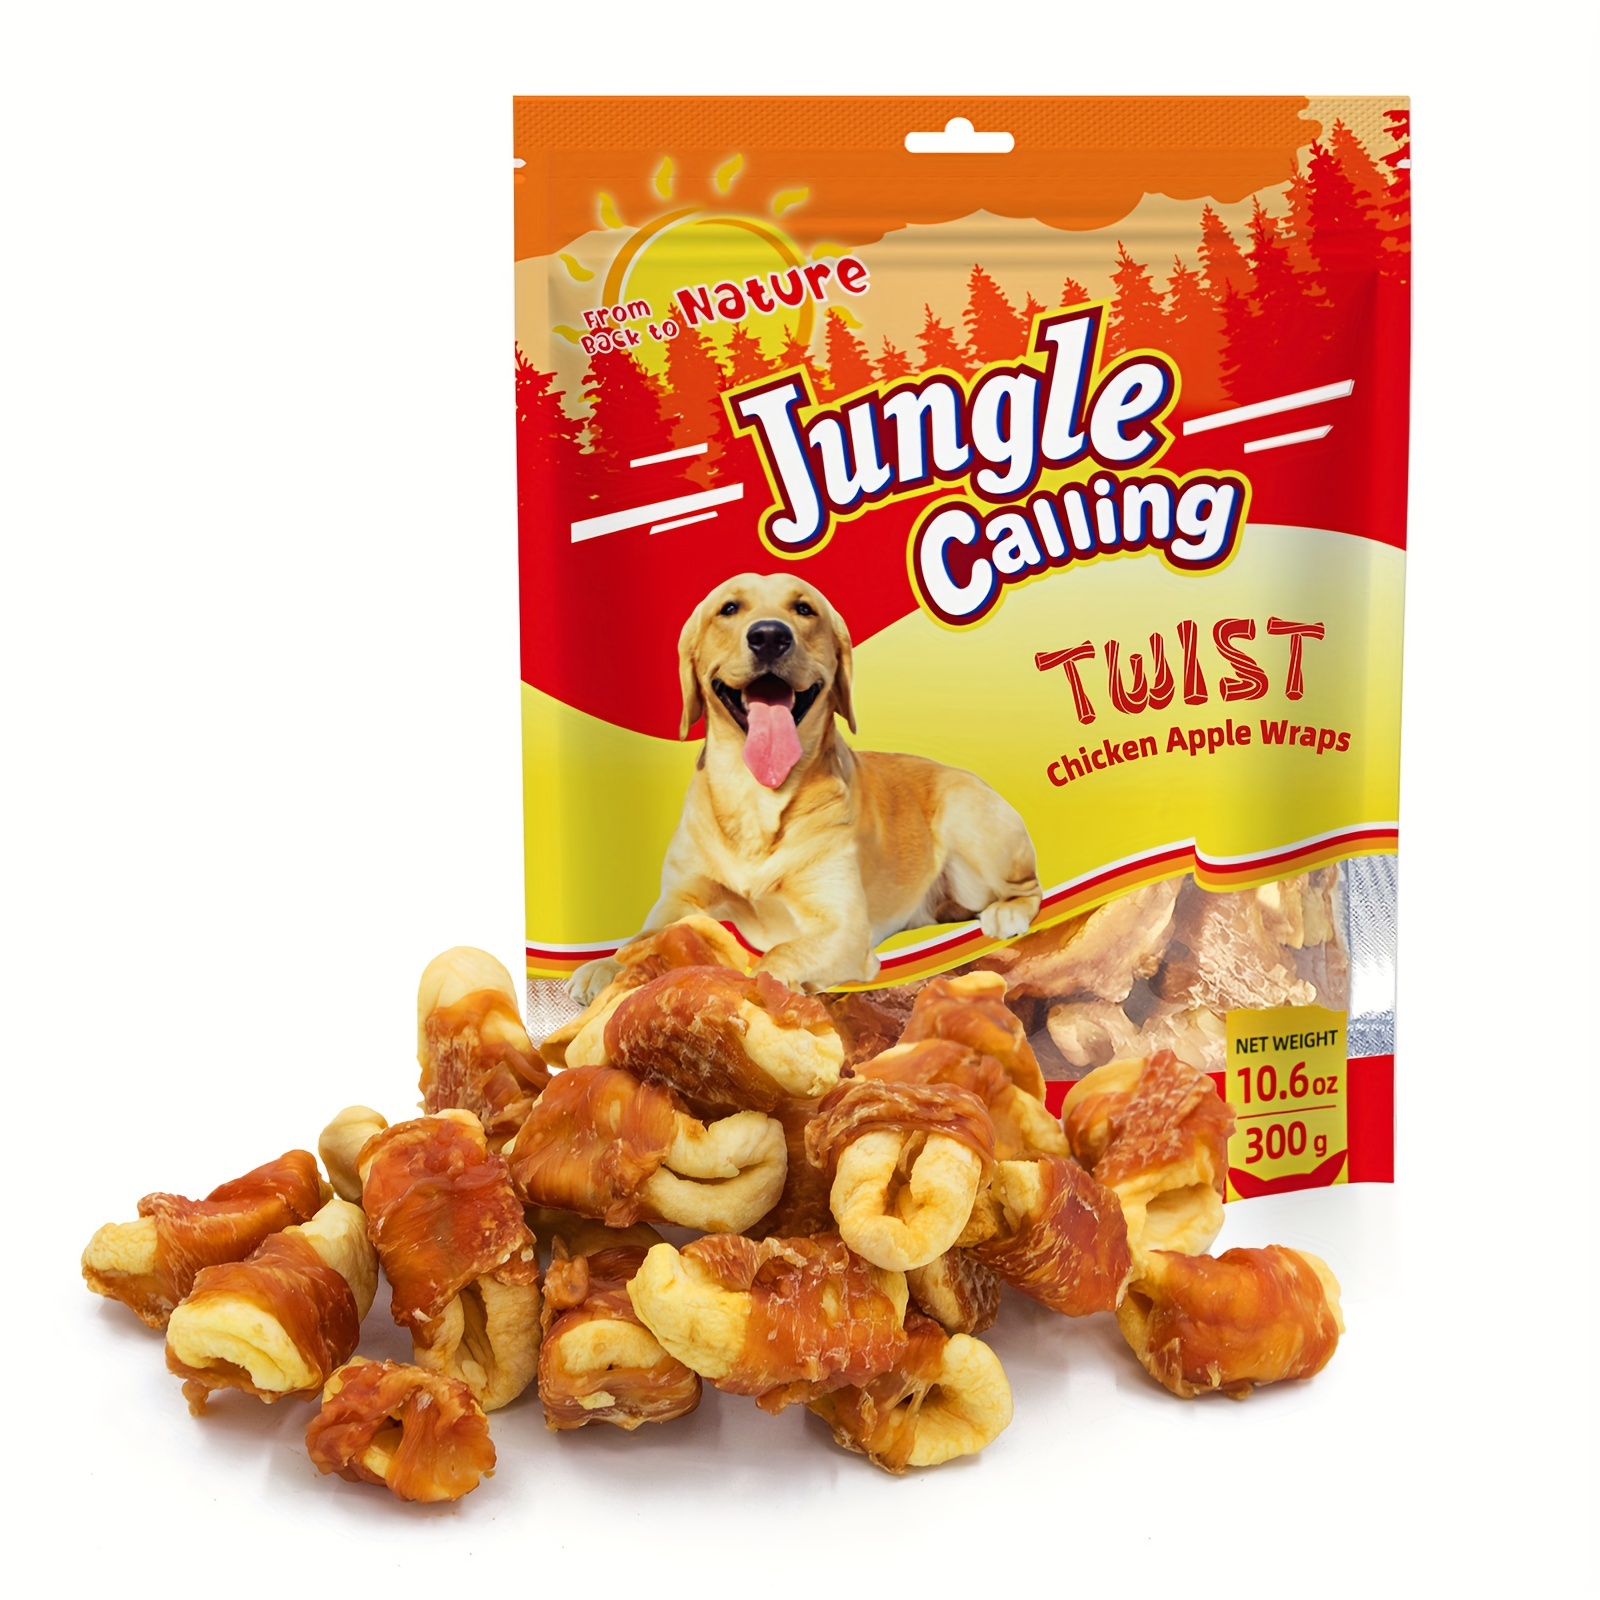 

Jungle Calling Dog Treats, Skinless Chicken Wrapped Treats, Gluten And Grain Free, Chewy Dog Bites For Balanced Nutrition, 10.6oz